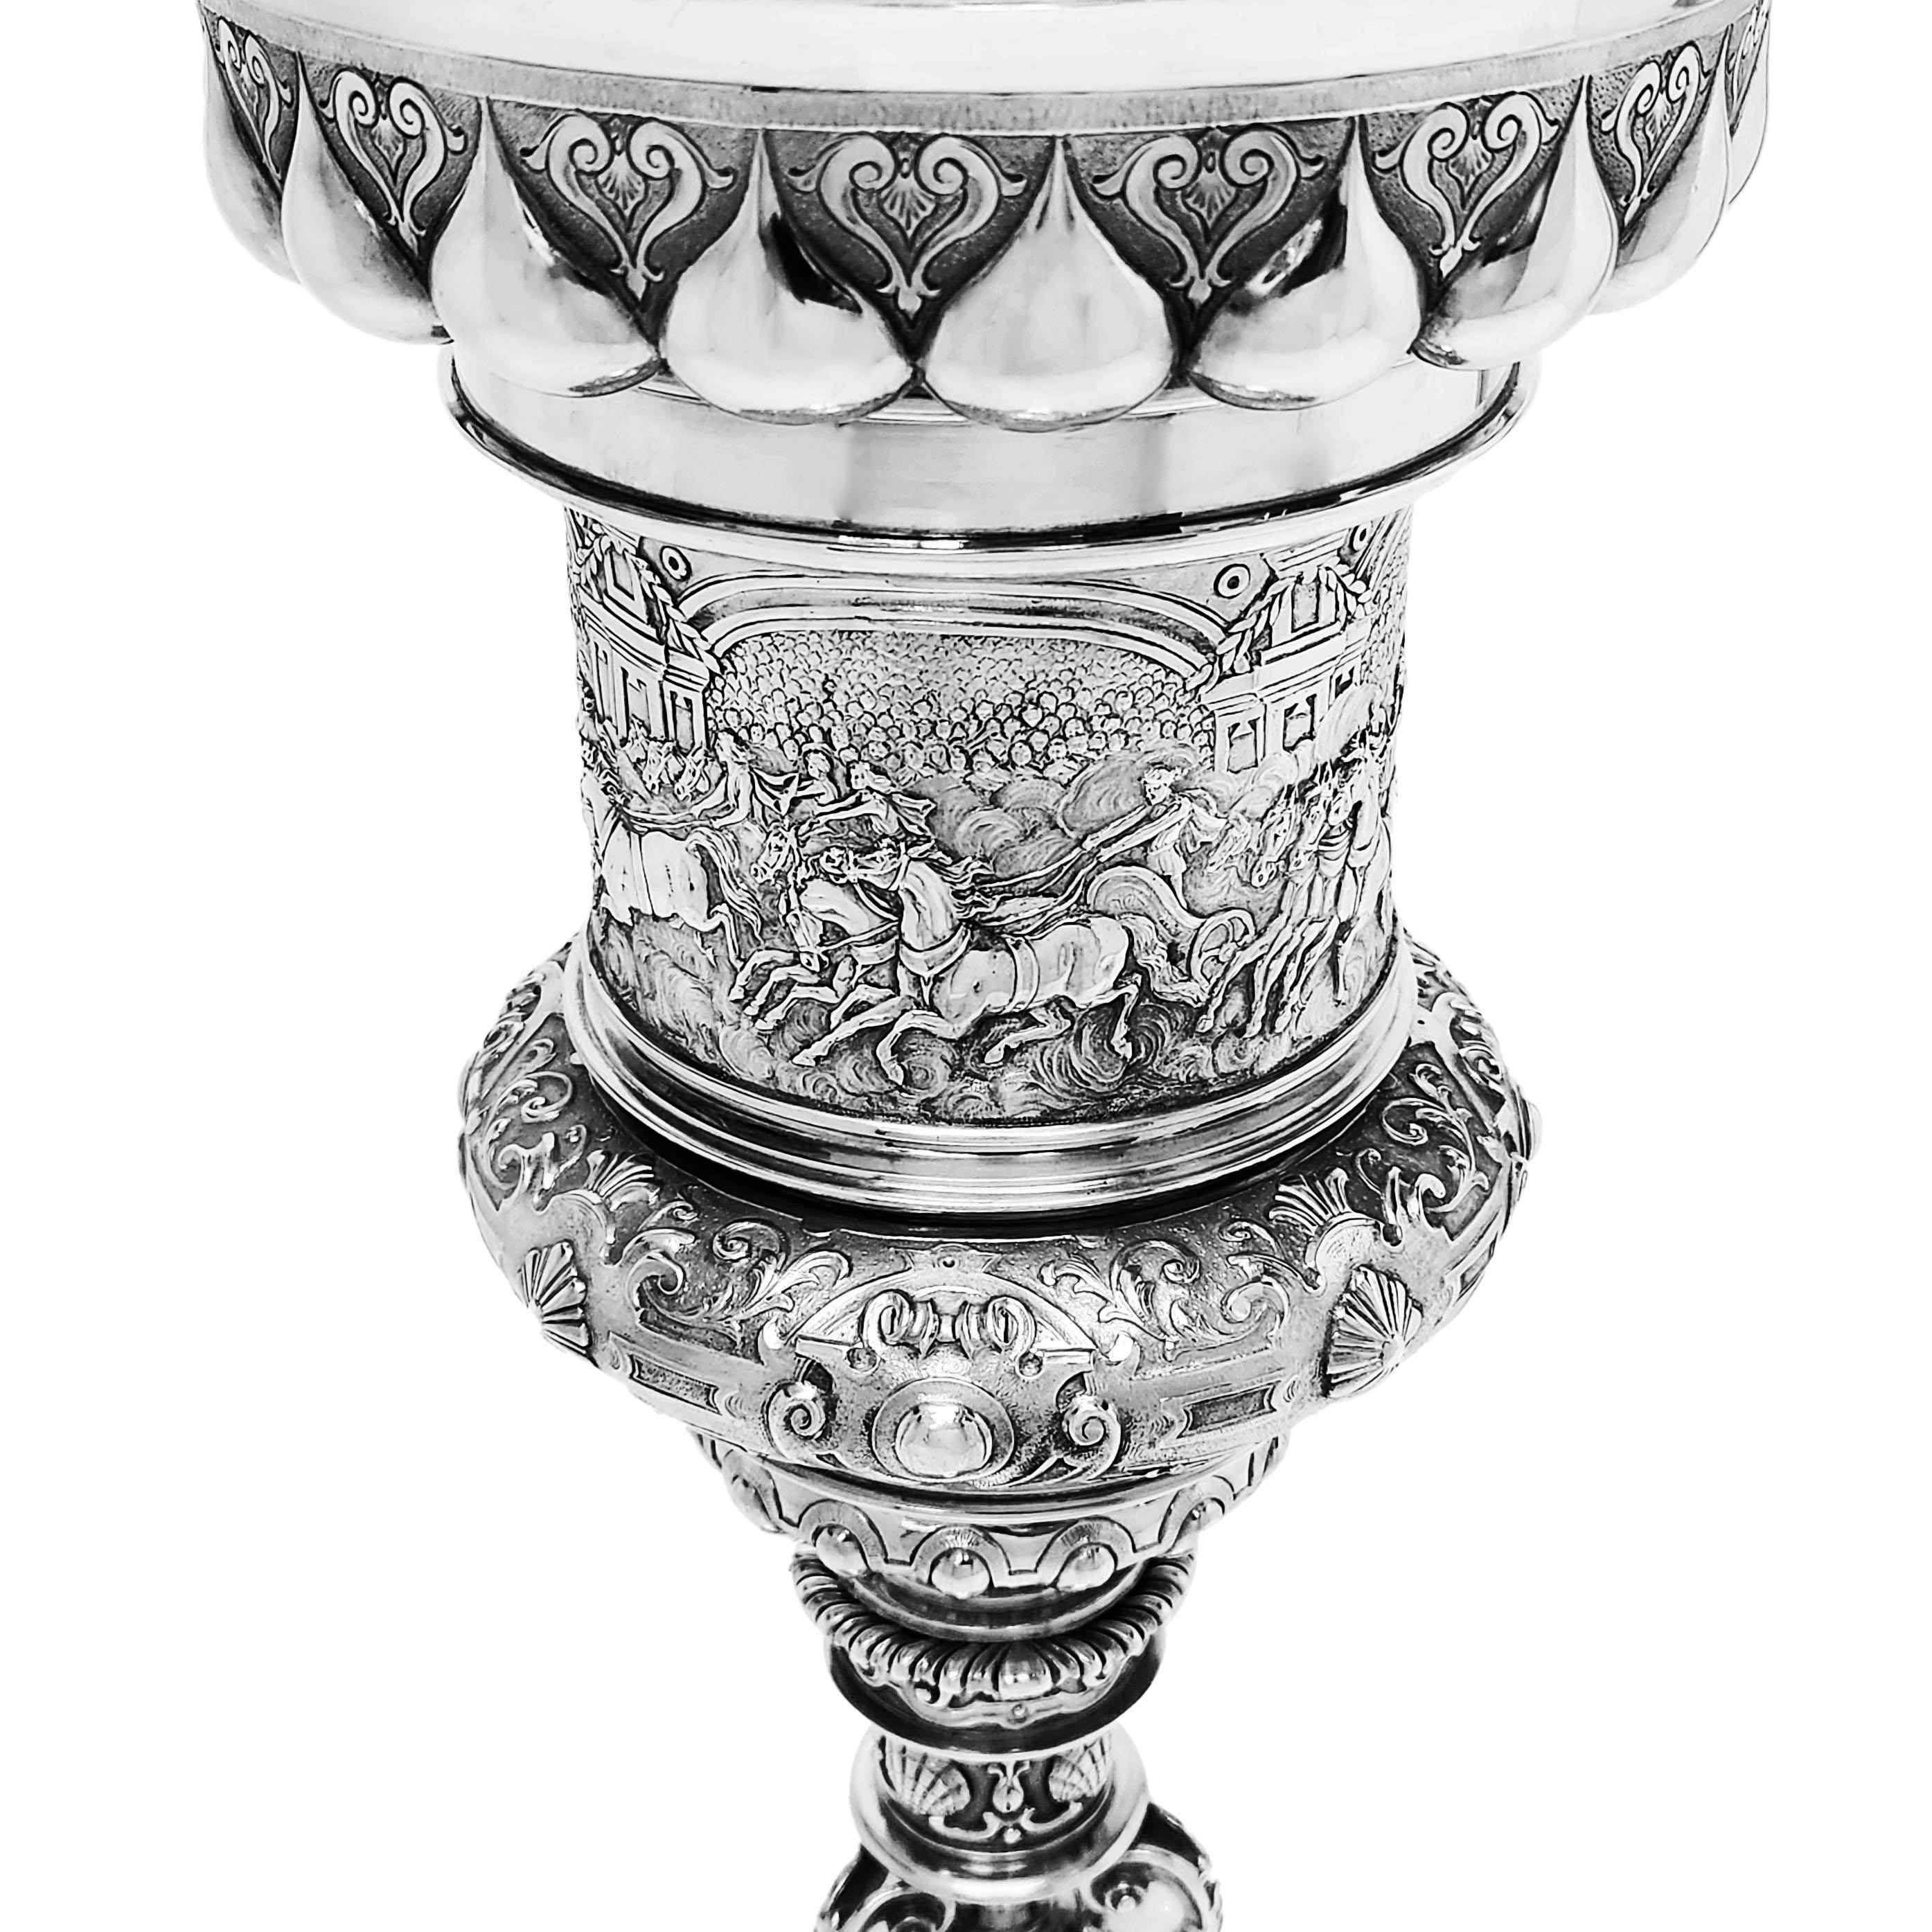 Antique Silver Steeple Cup Lidded Cup & Cover 1902 17th Century Style  In Good Condition For Sale In London, GB